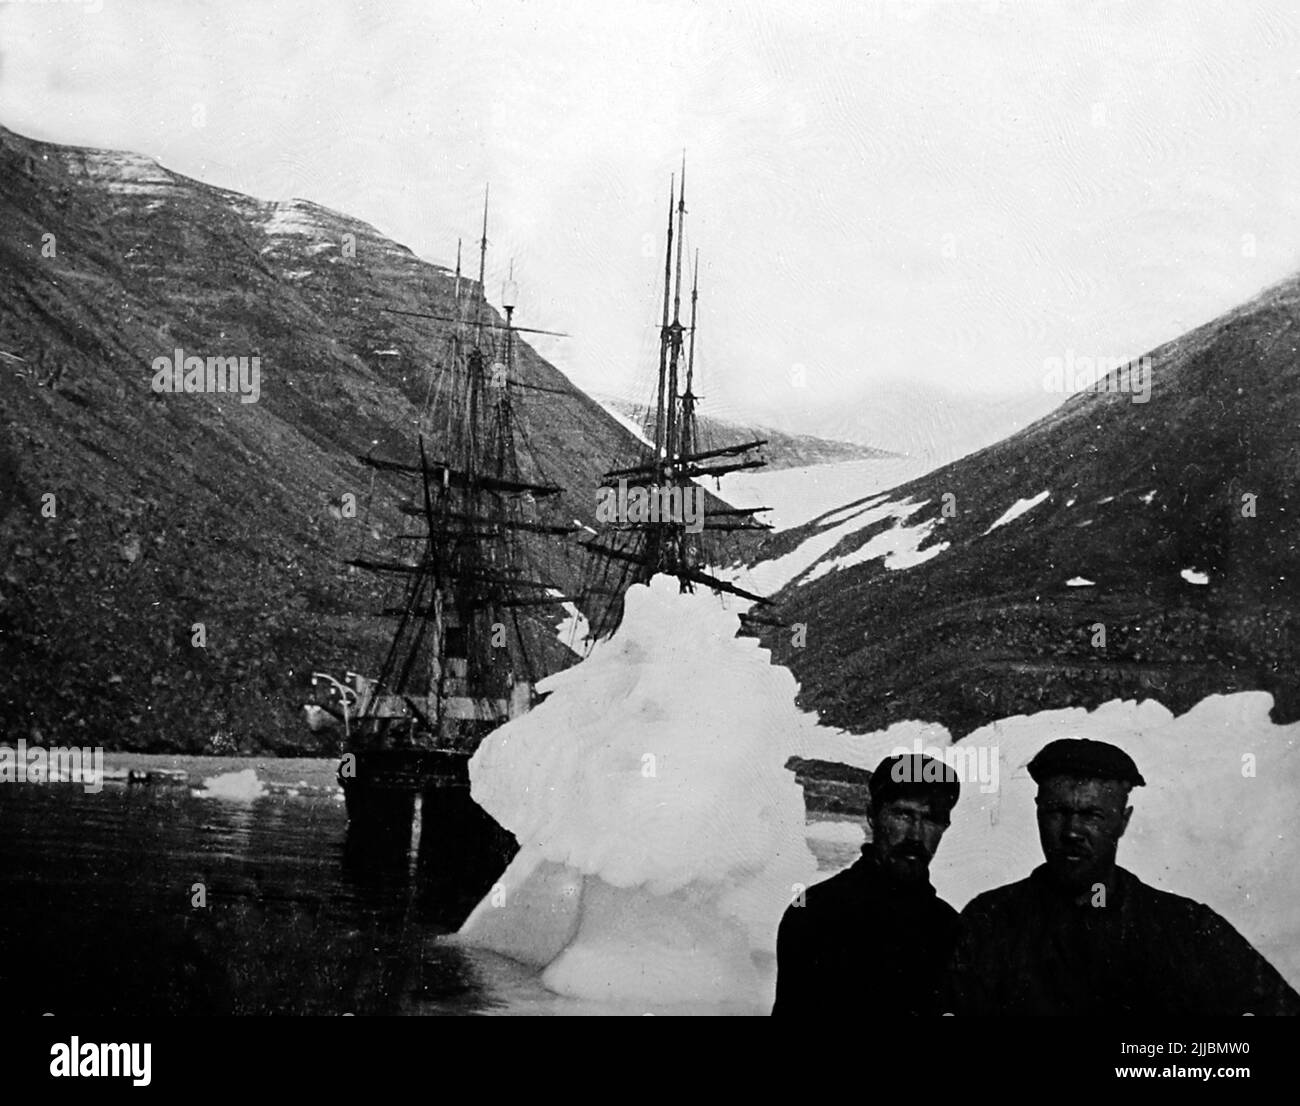 Navi Windward ed Eric a Nuerke, Groenlandia, Peary Arctic Expedition nel 1901 Foto Stock